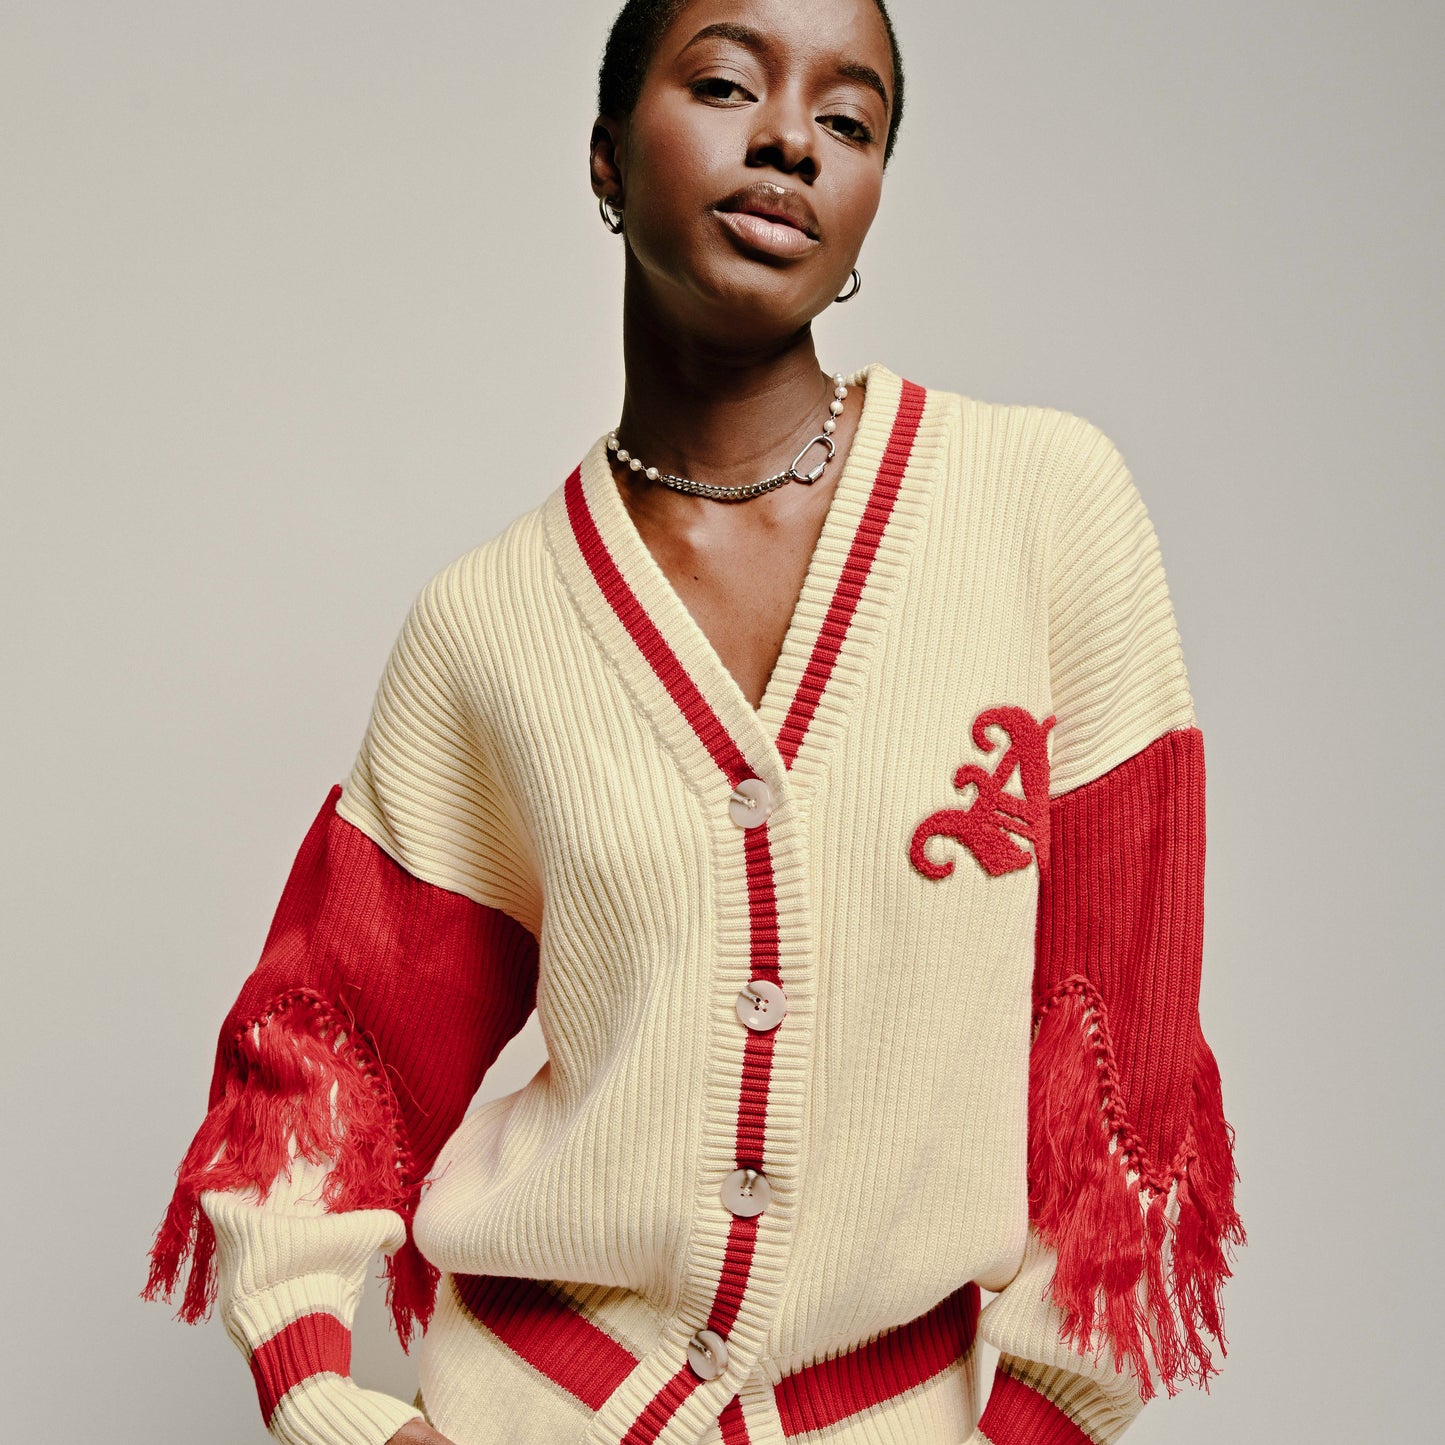 Model wearing Varsity Cardigan by Aseye Studio in Cream and Red